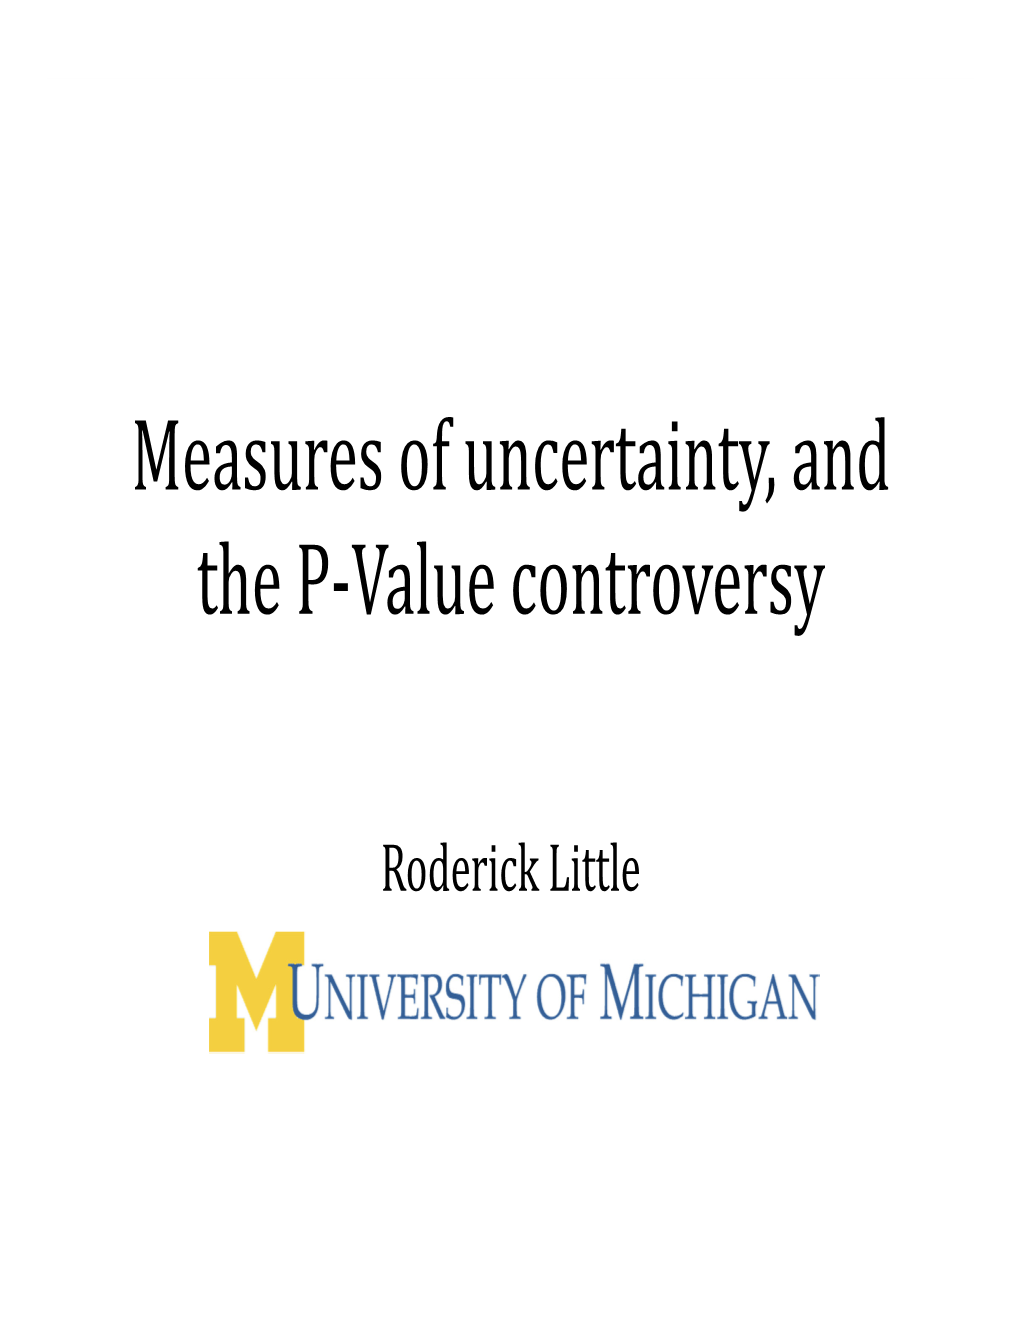 Measures of Uncertainty, and the P-Value Controversy